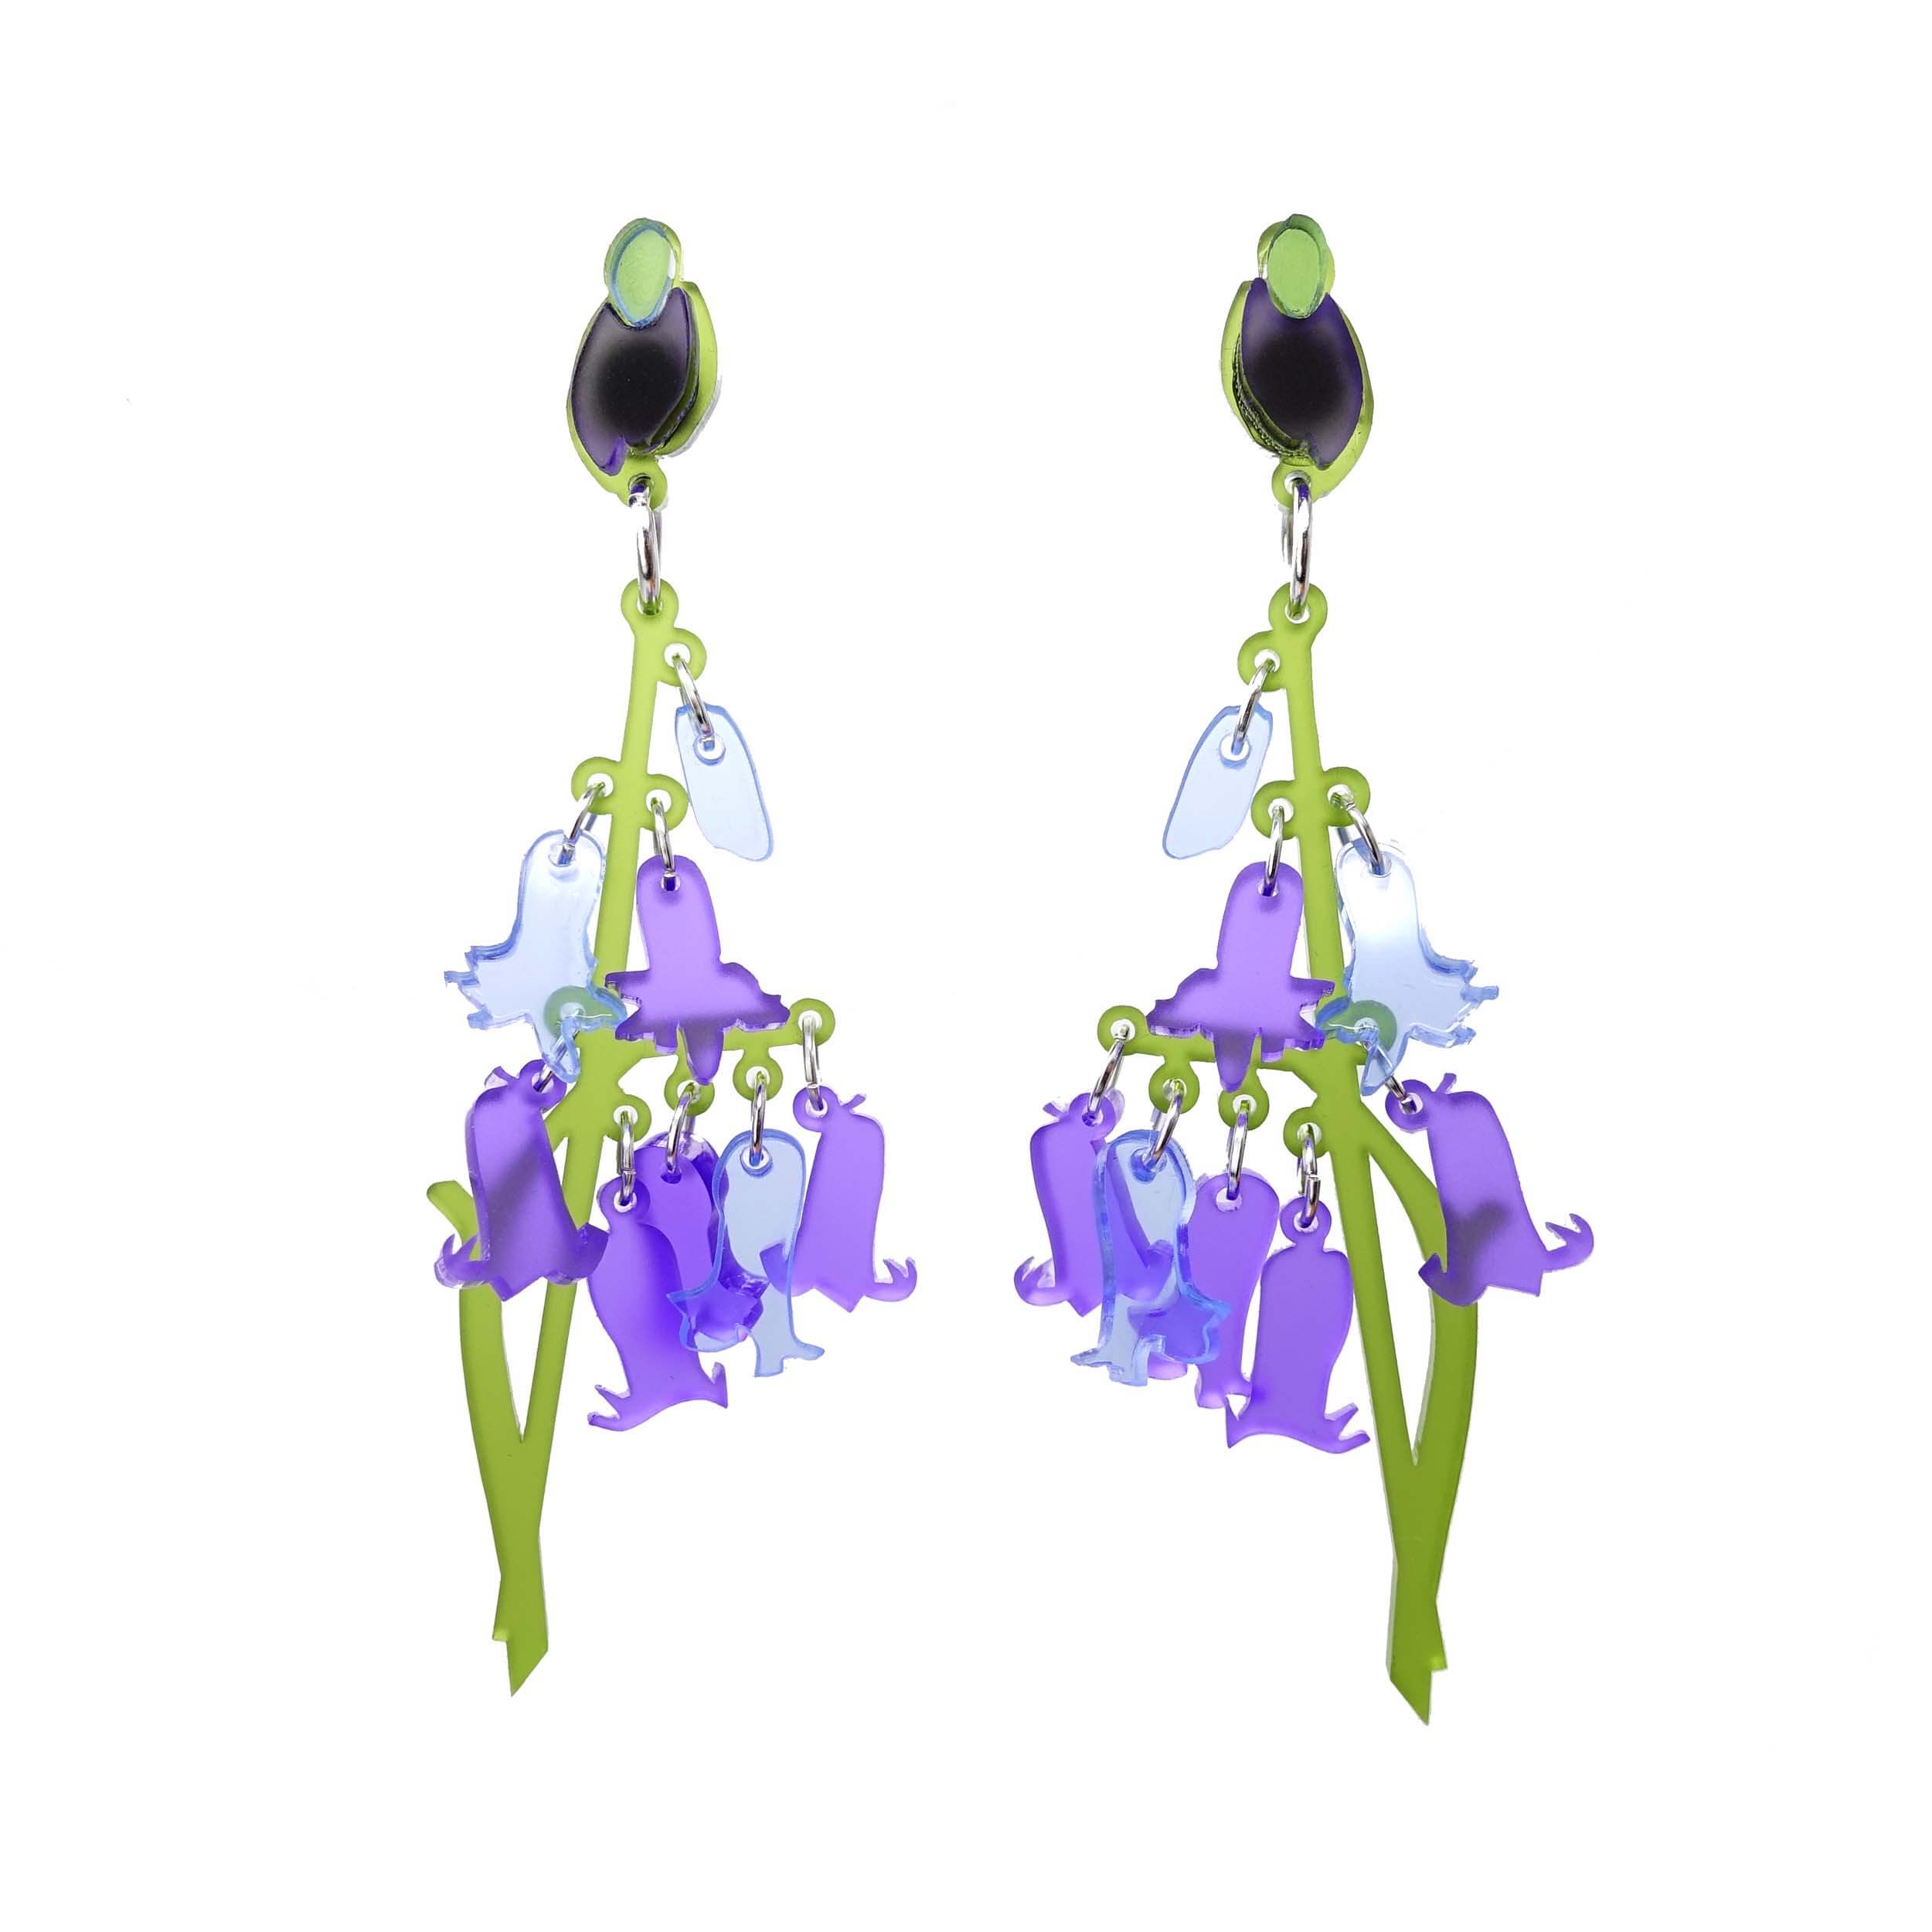 Bluebell earrings designed by Sarah Day for Wear and Resist.